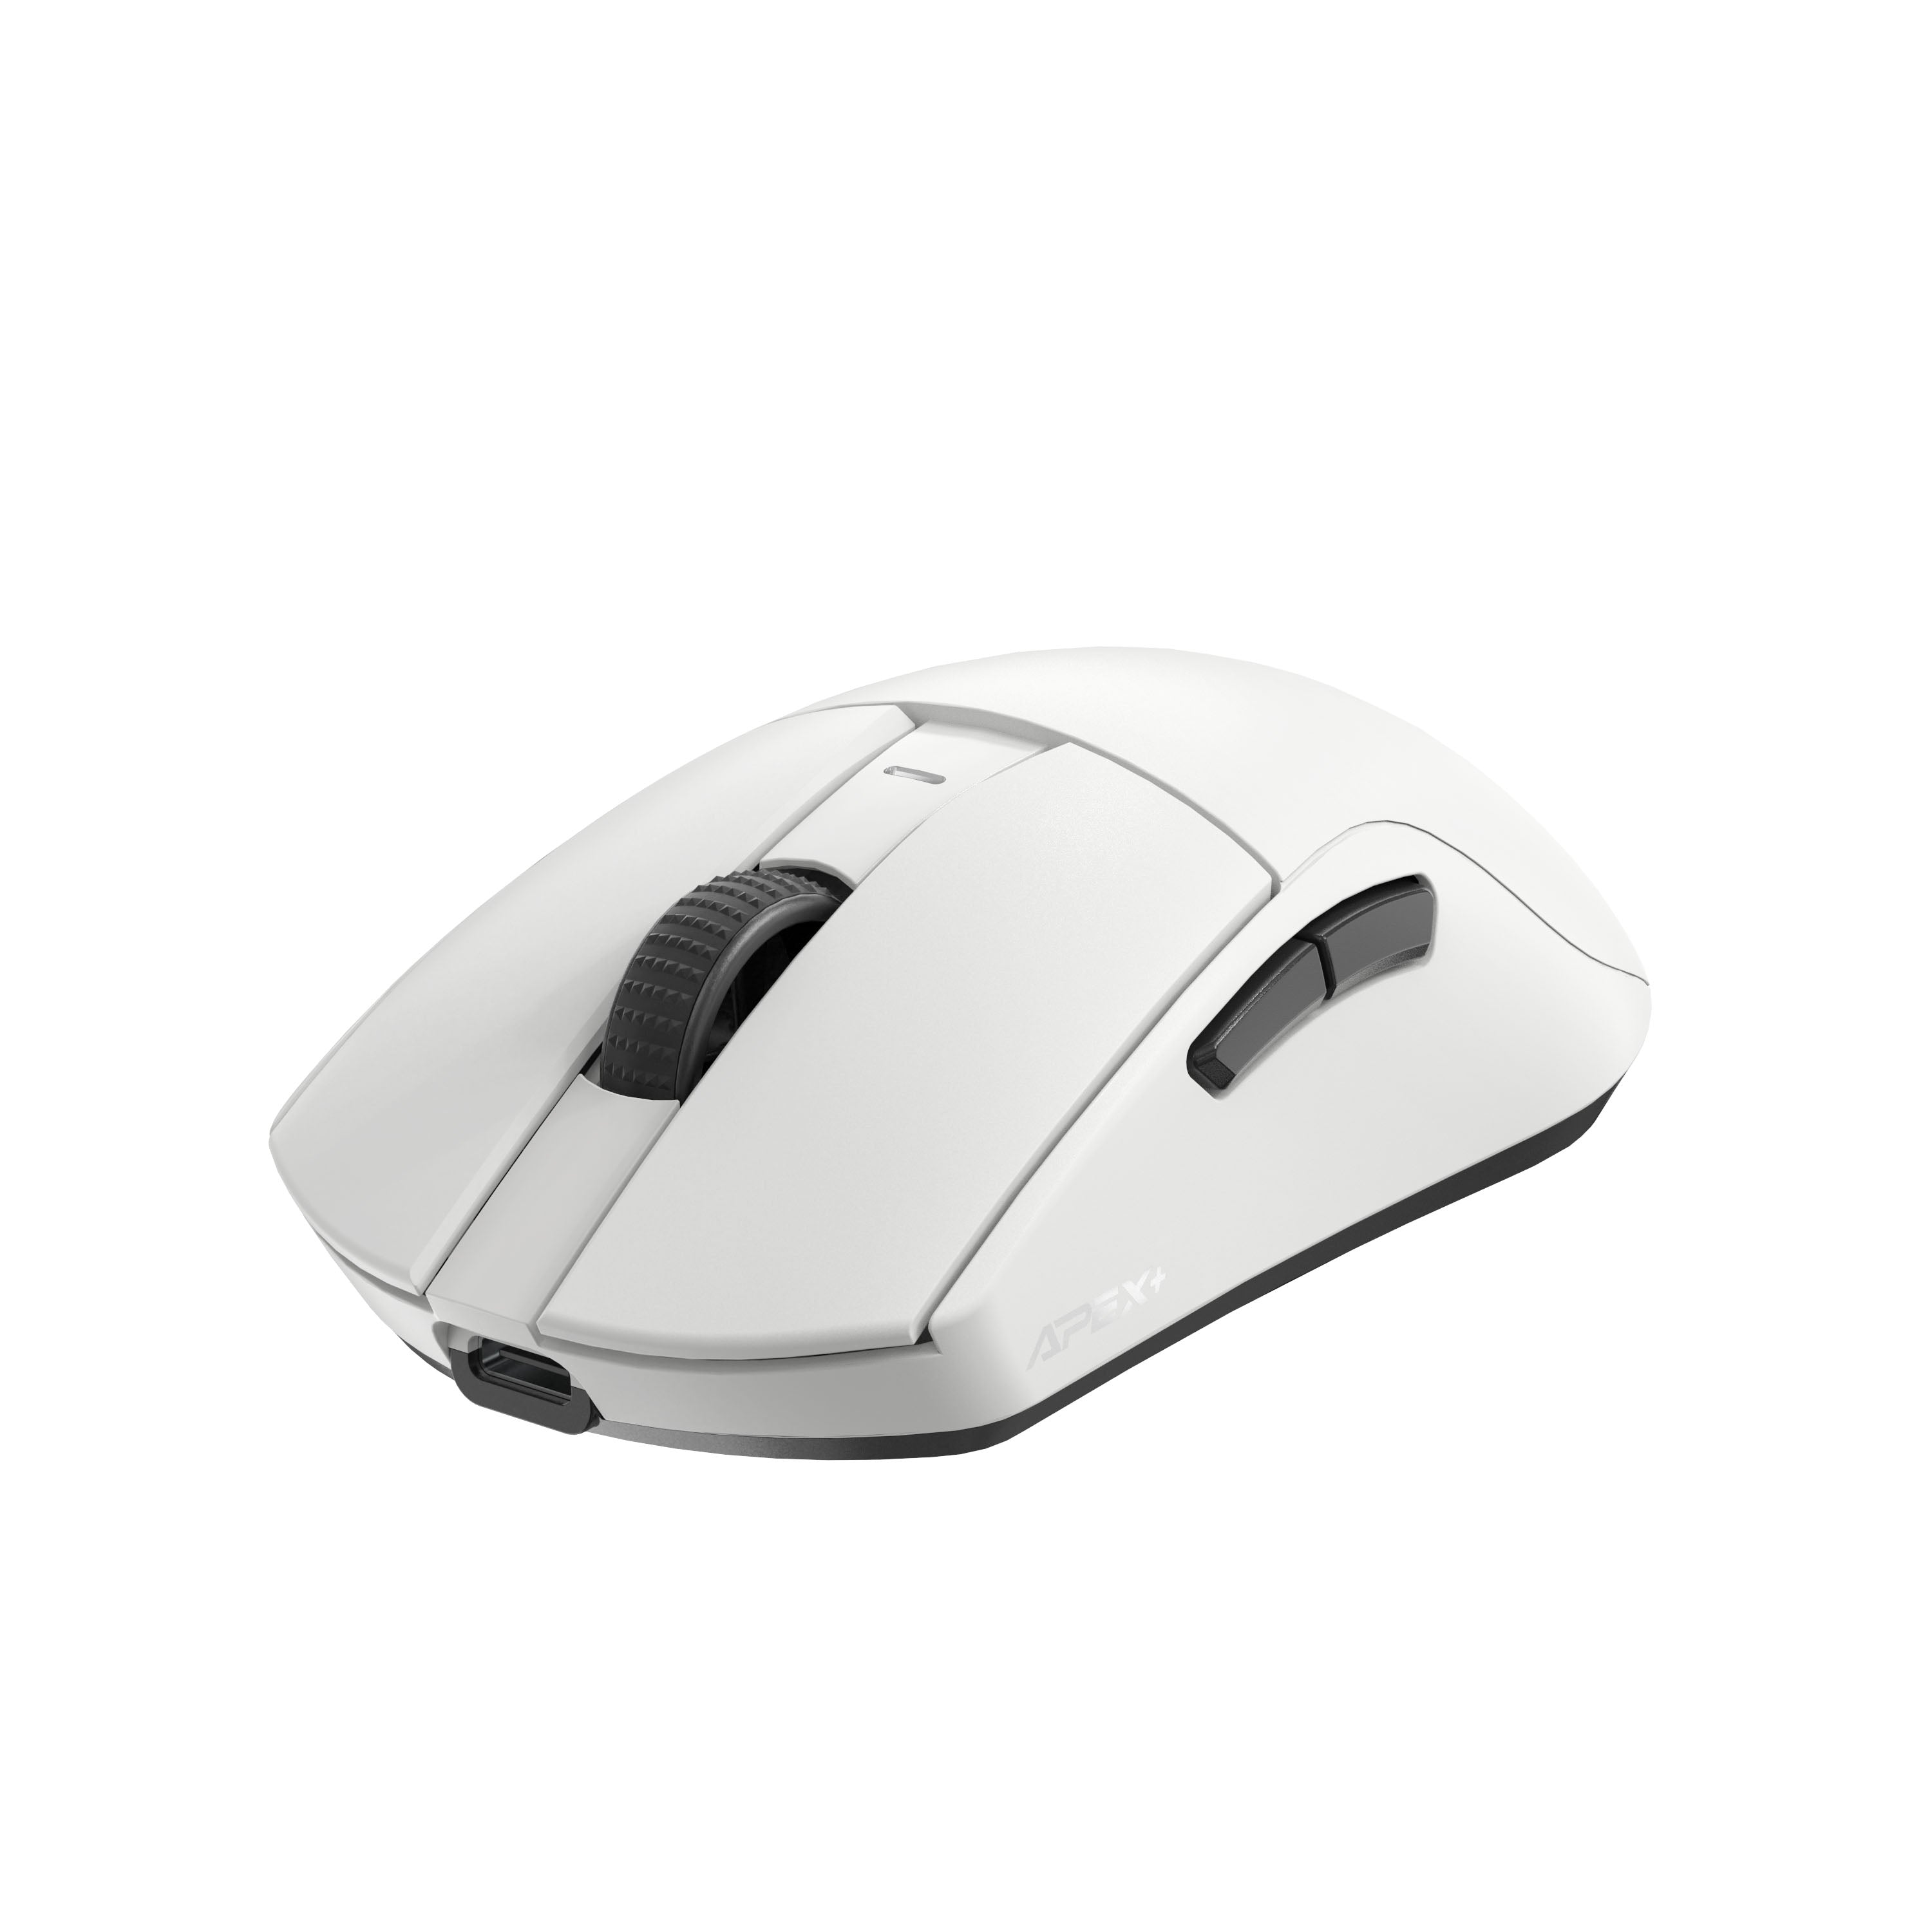 EVOLUTION Wireless Gaming Mouse